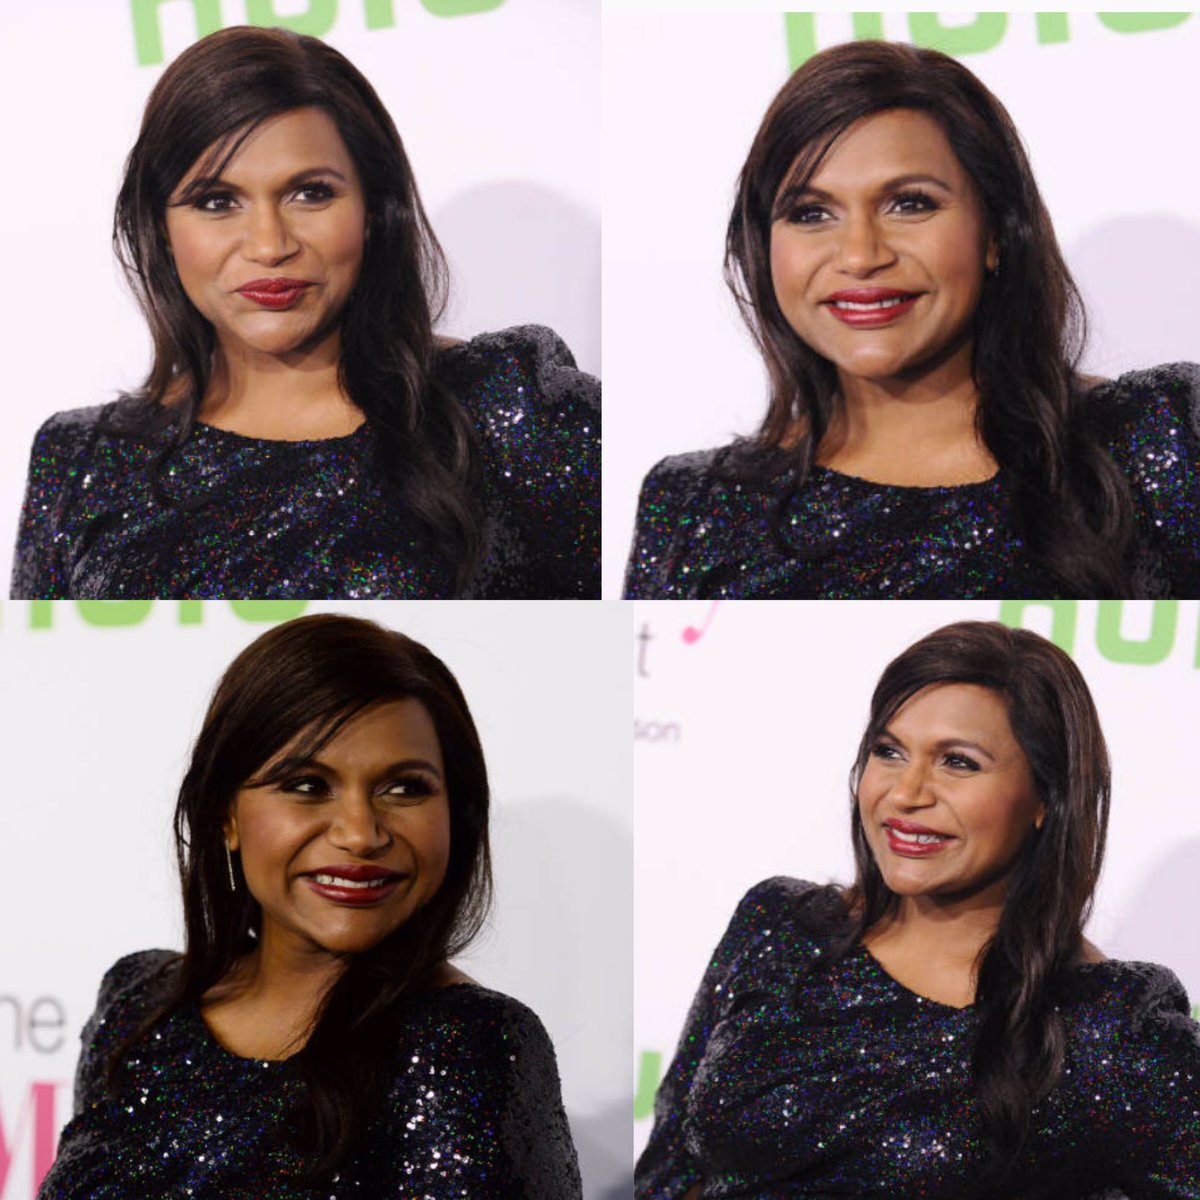 A pretty good representation of my night. #TheMindyProject #LaterBaby @hulu https://t.co/9fxwUM8moQ